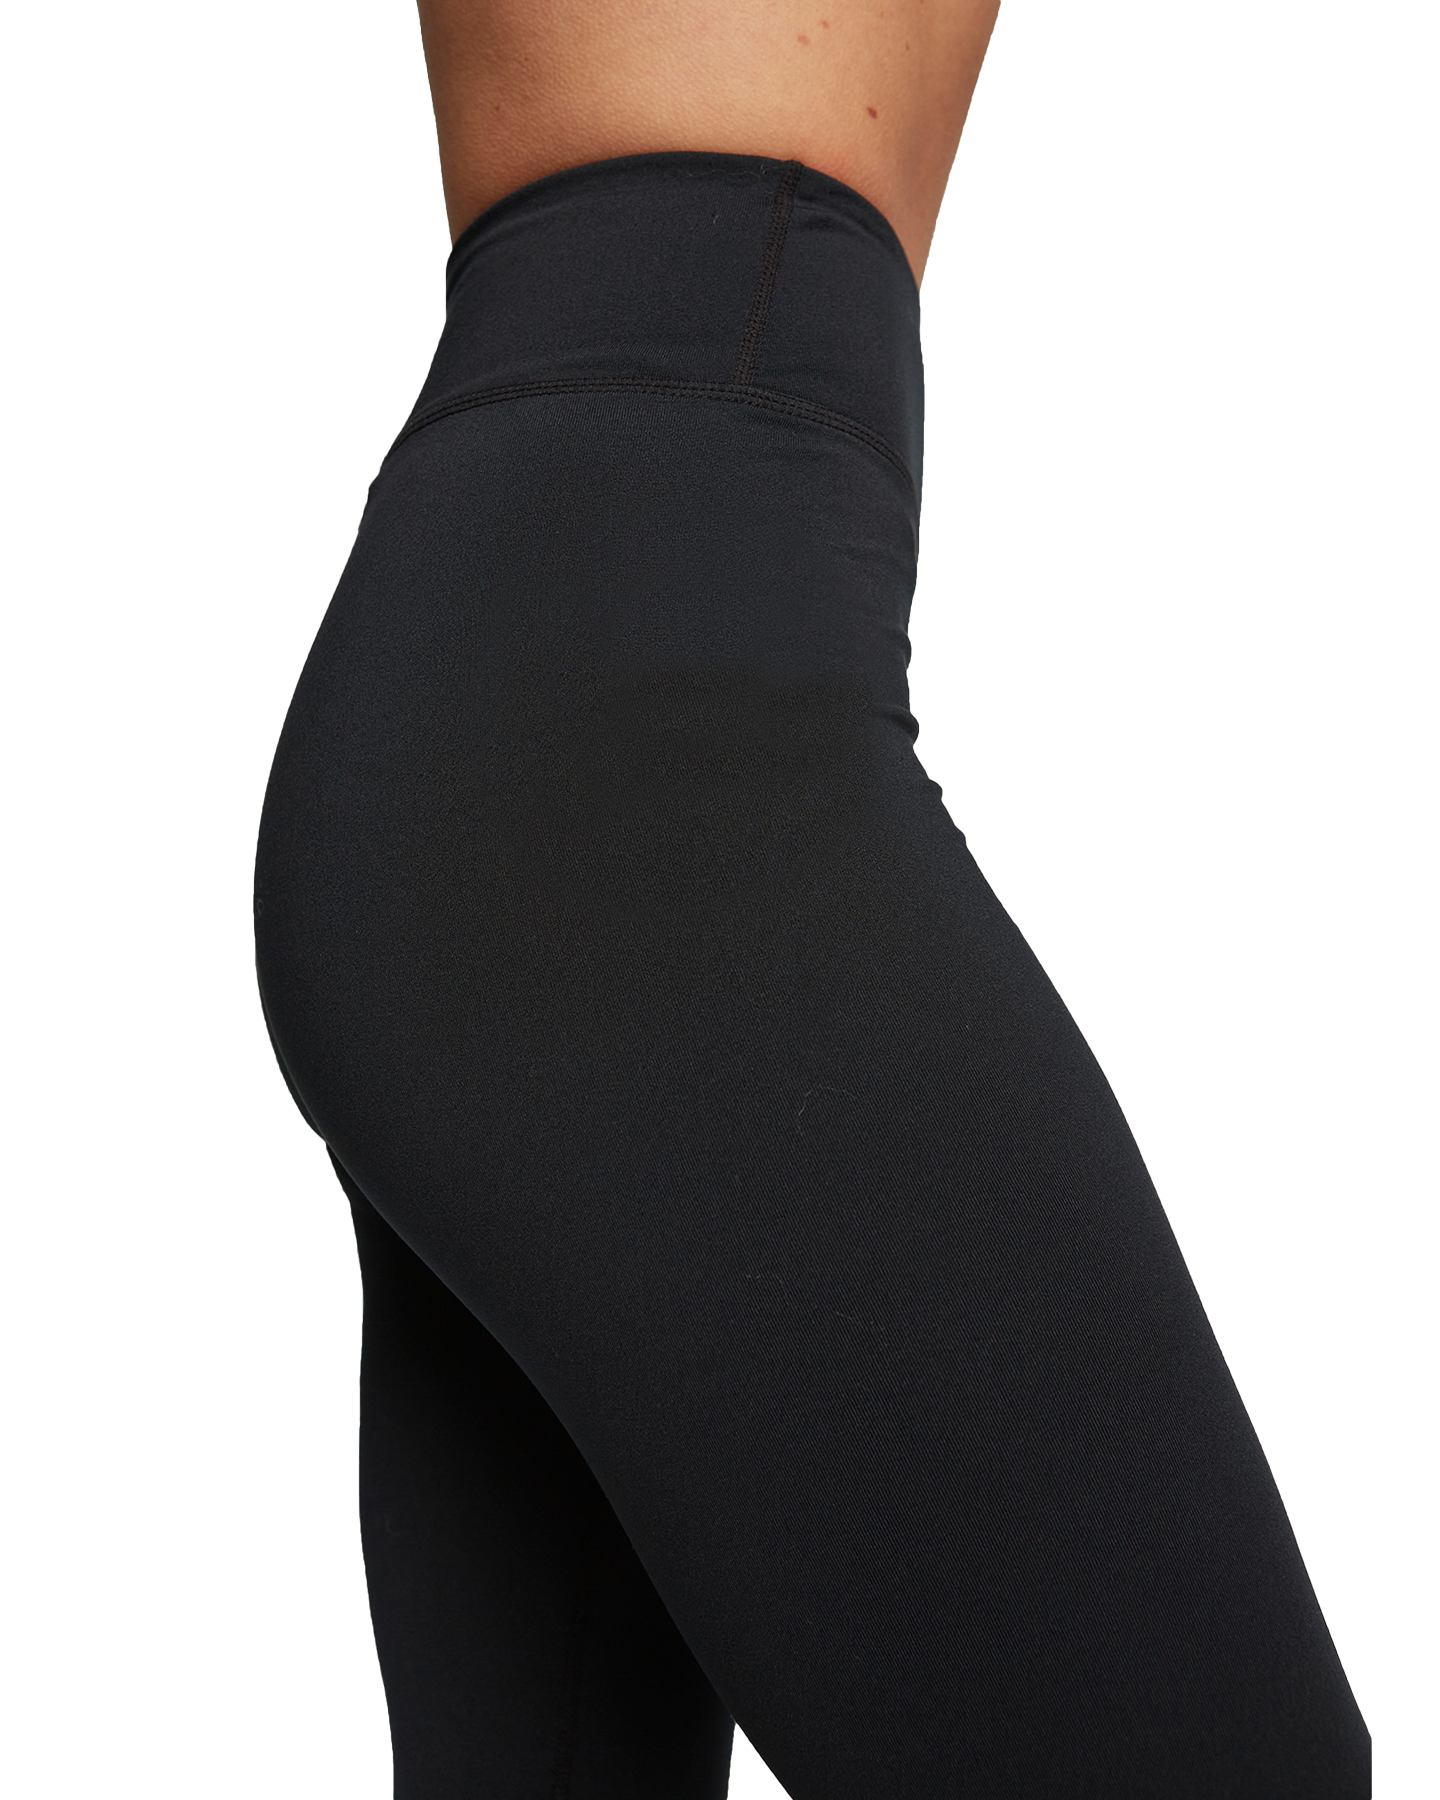 Rojo Tranquility Park (Plus Size) 7/8 Women's Thermal Pants Women's Thermals - SnowSkiersWarehouse